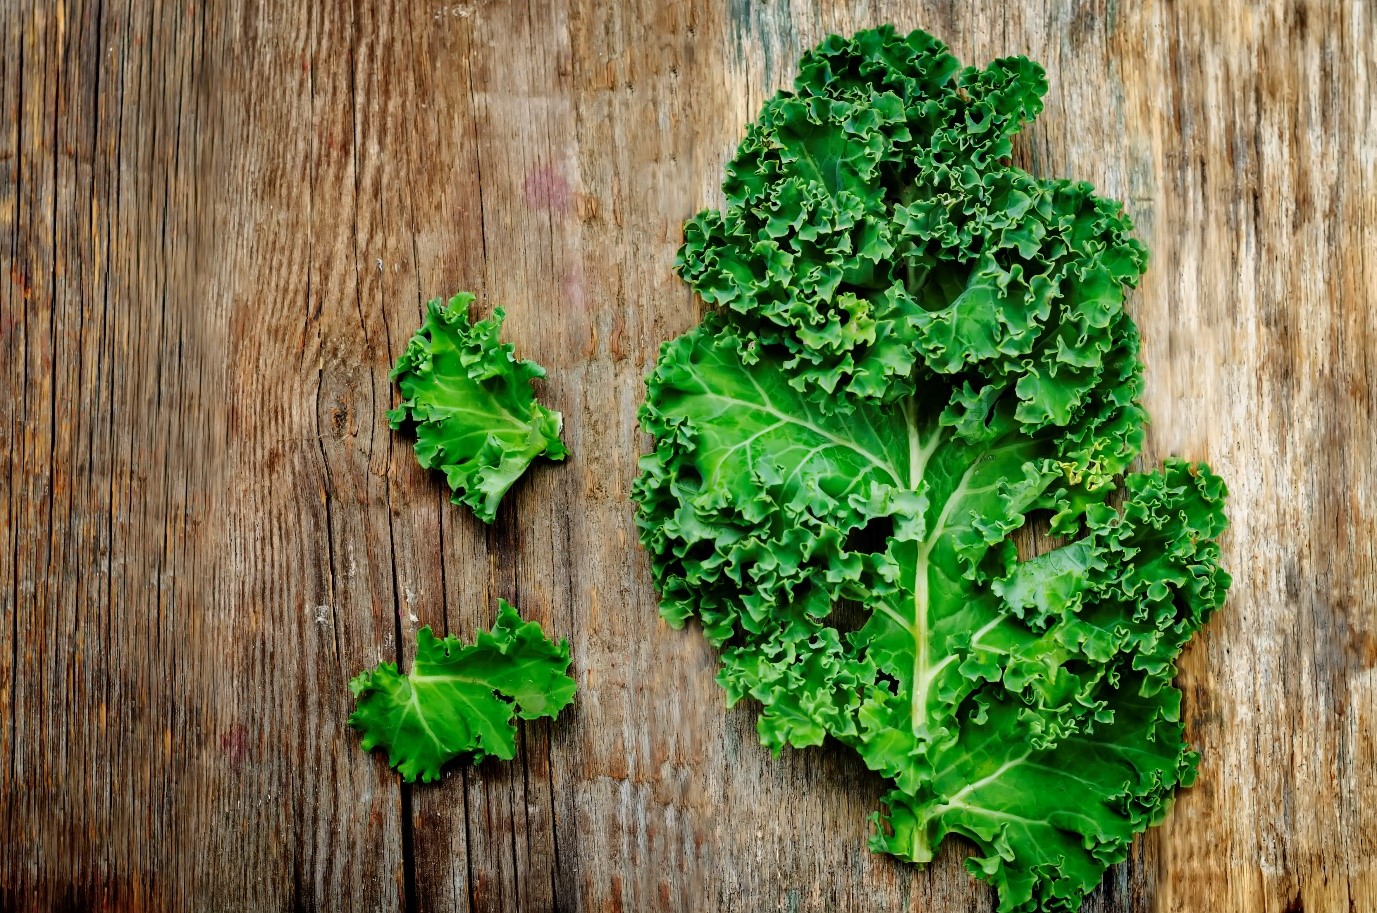 Is Kale Really as Healthy as Everyone Thinks? The Dark Side of Kale Exposed!